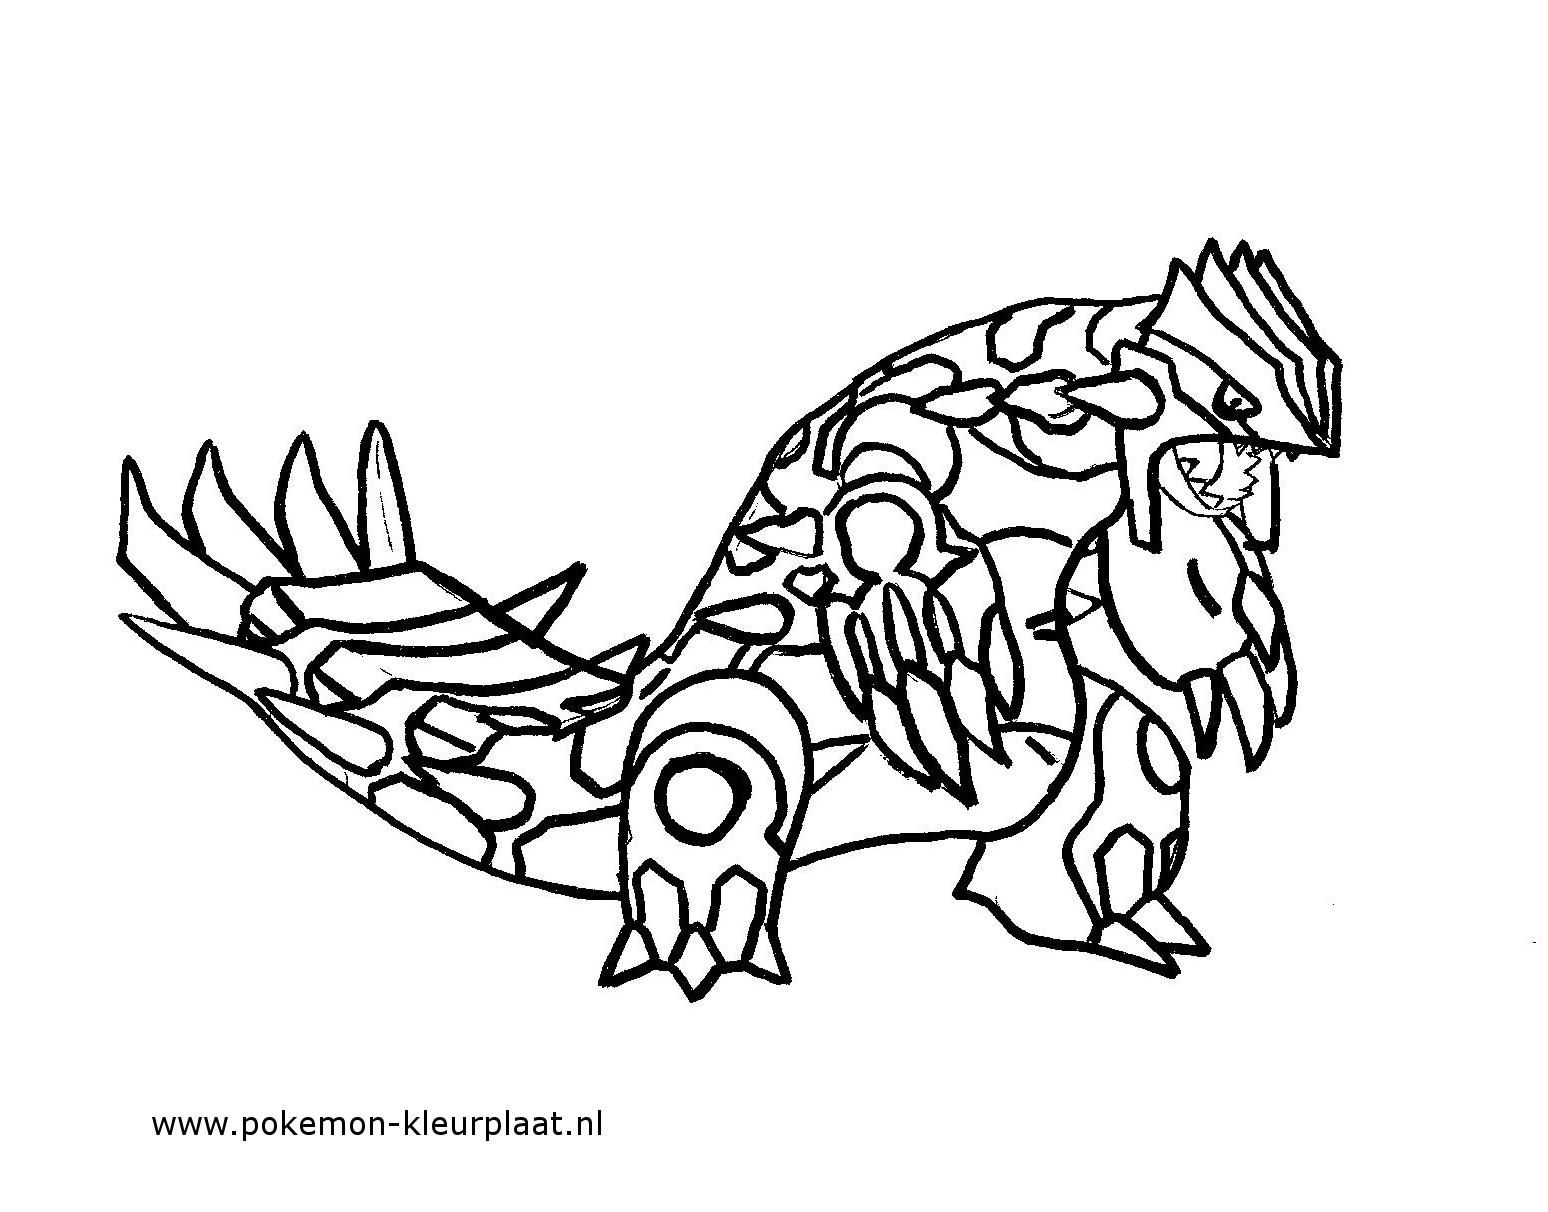 Coloring pages, Coloring and Art